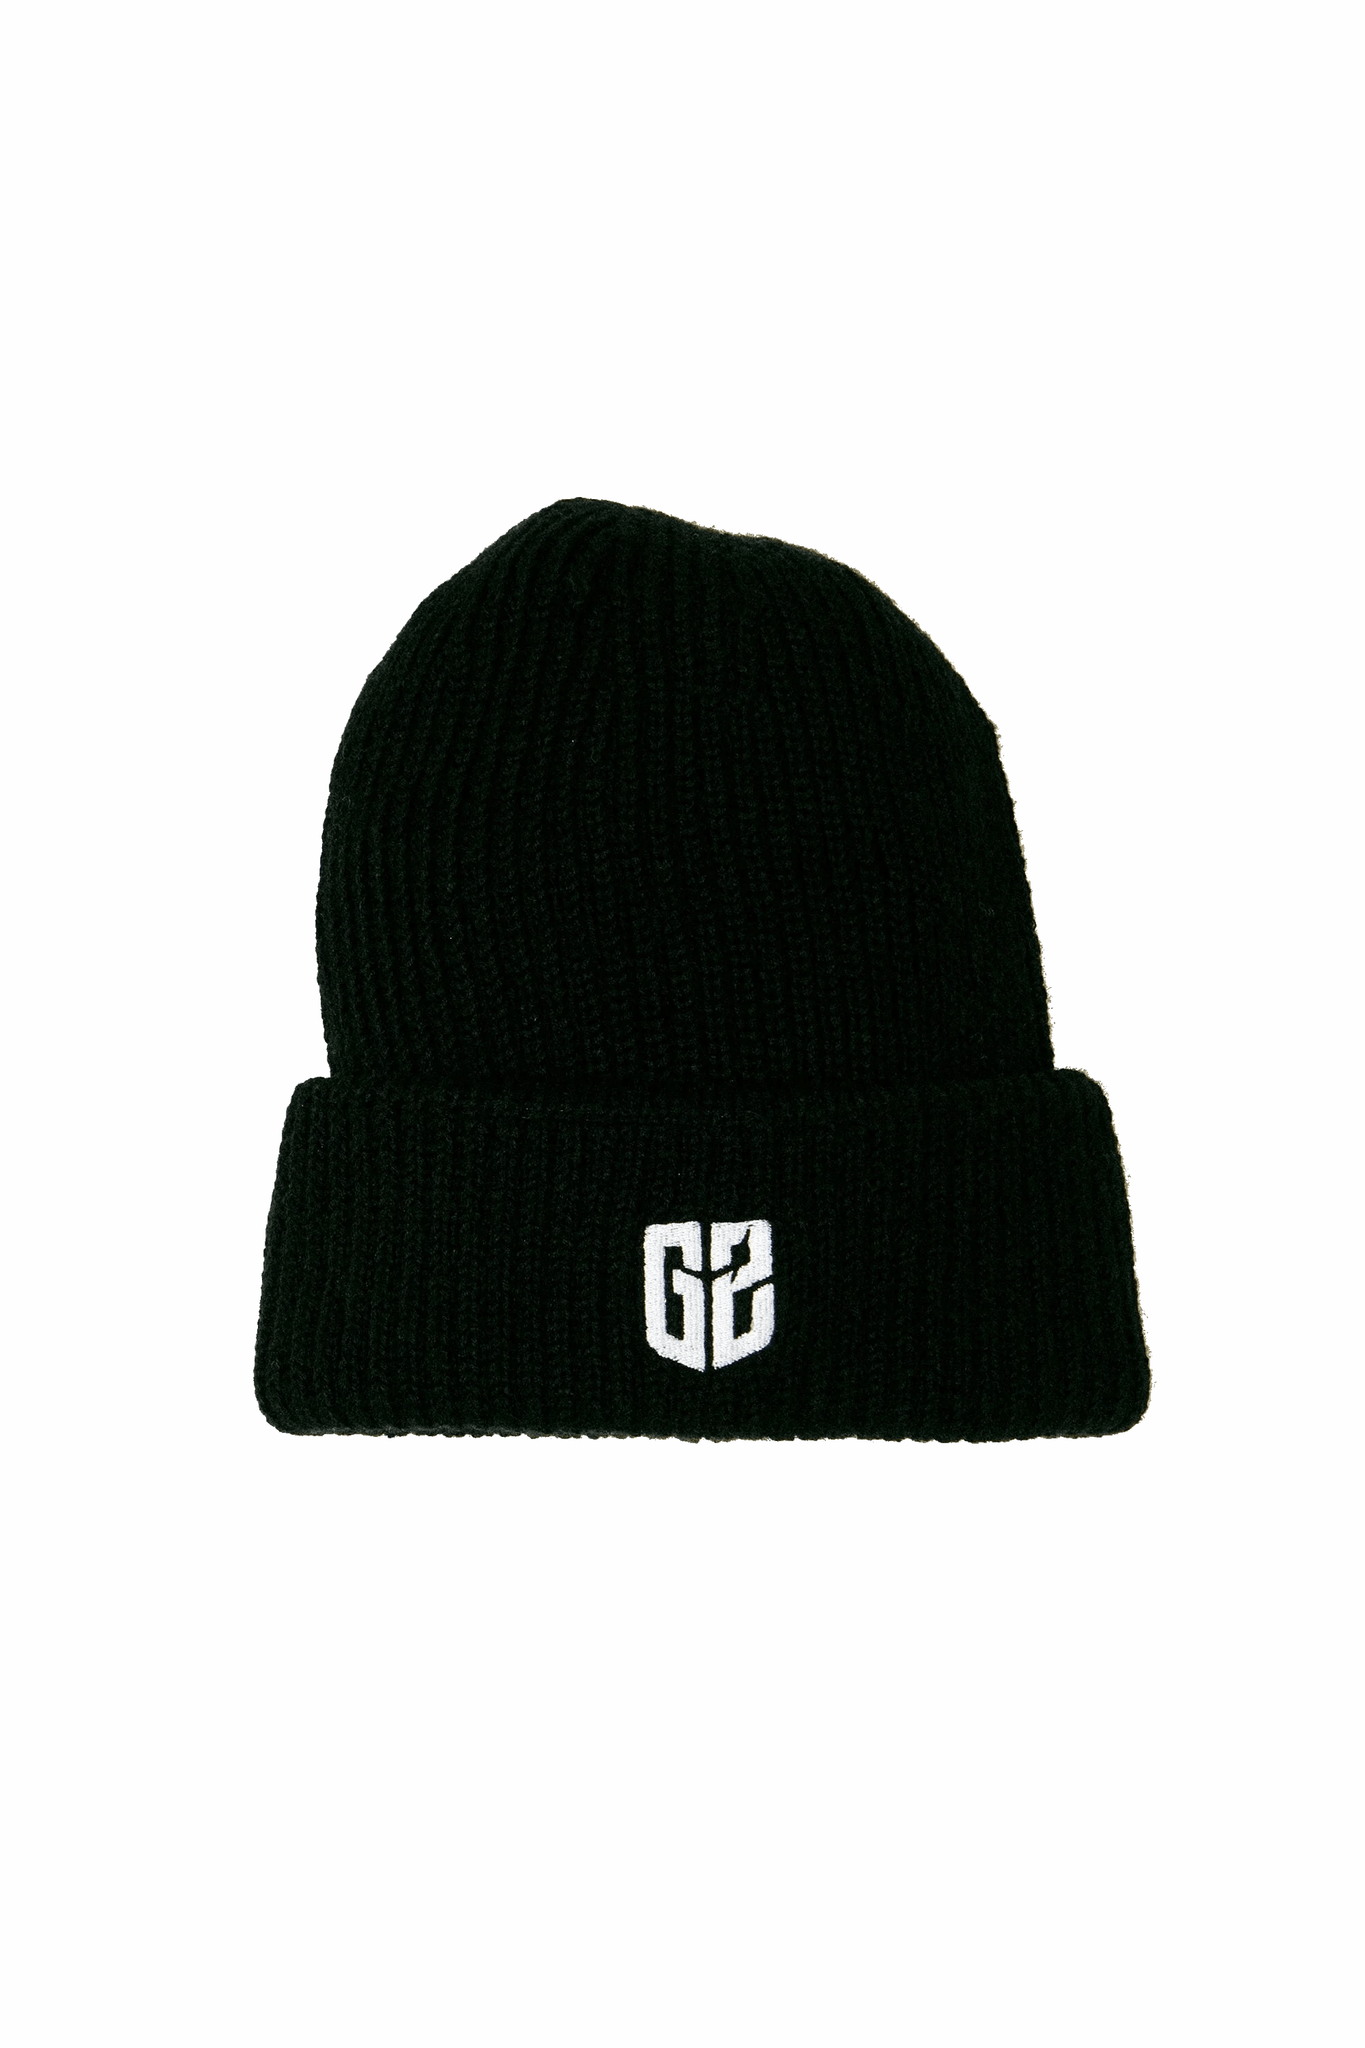  Black G2 Esports essentials beanie, a must-have for esports fans. Stay warm and showcase your team spirit with this classic beanie.